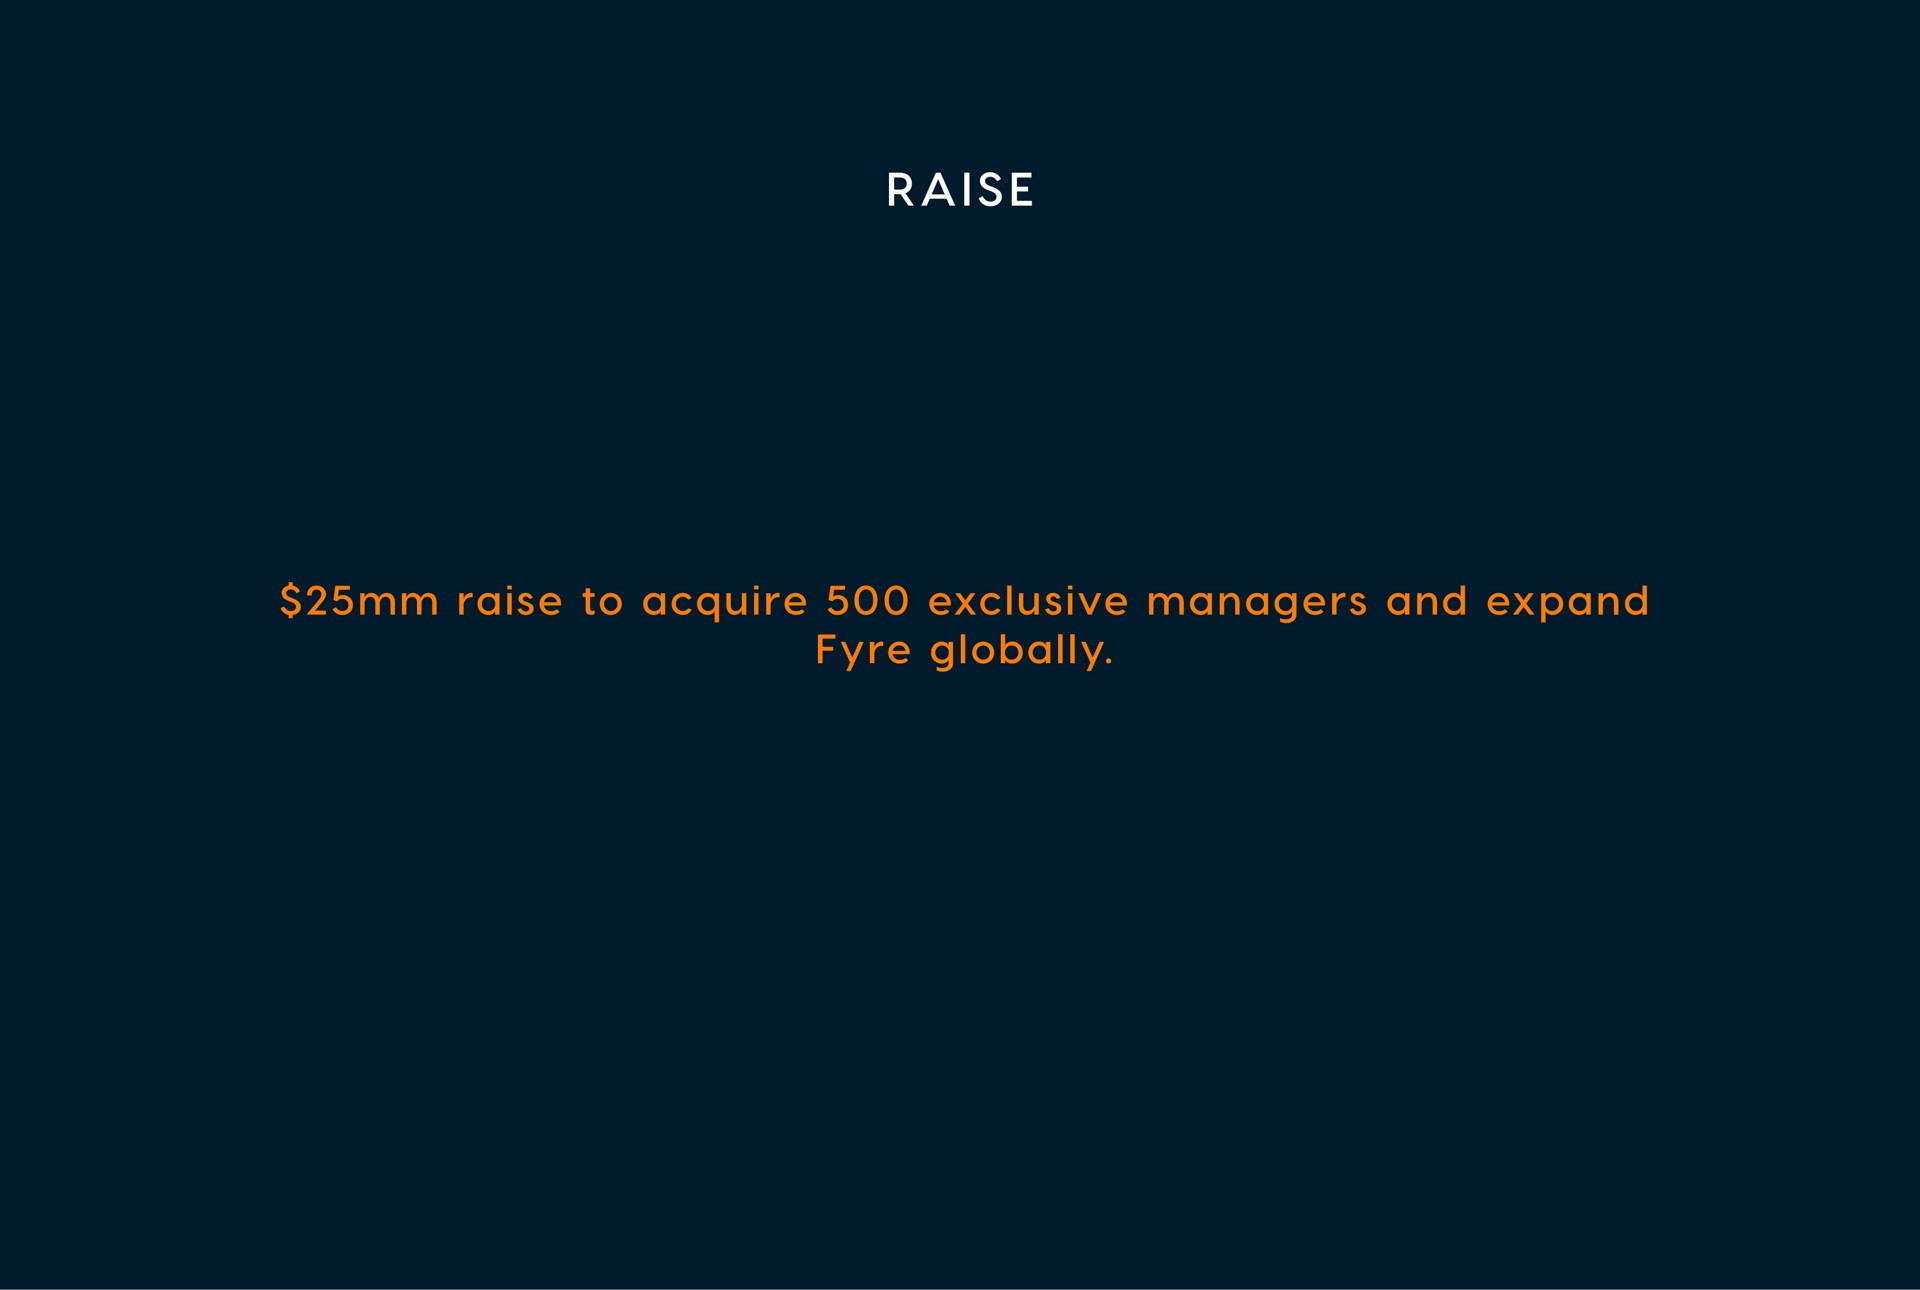 a i raise to acquire exclusive managers and expand globally | Fyre